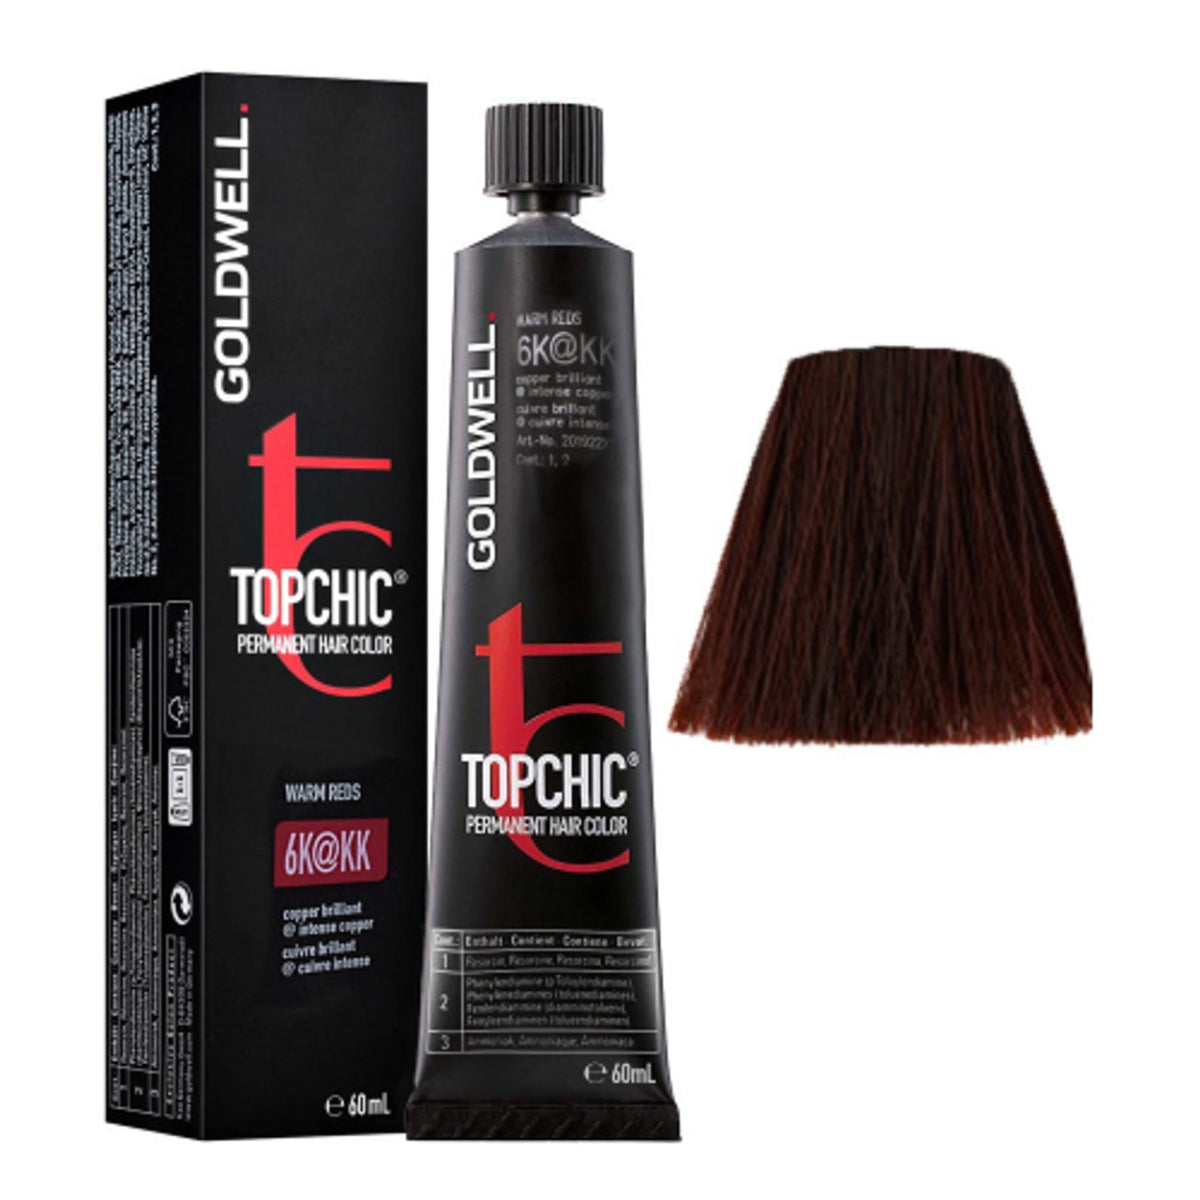 Goldwell Topchic Tube 60ml - MORE COLOURS - Southwestsix Cosmetics Goldwell Topchic Tube 60ml - MORE COLOURS - Hair Dyes Goldwell Southwestsix Cosmetics 6K@KK Goldwell Topchic Tube 60ml - MORE COLOURS -